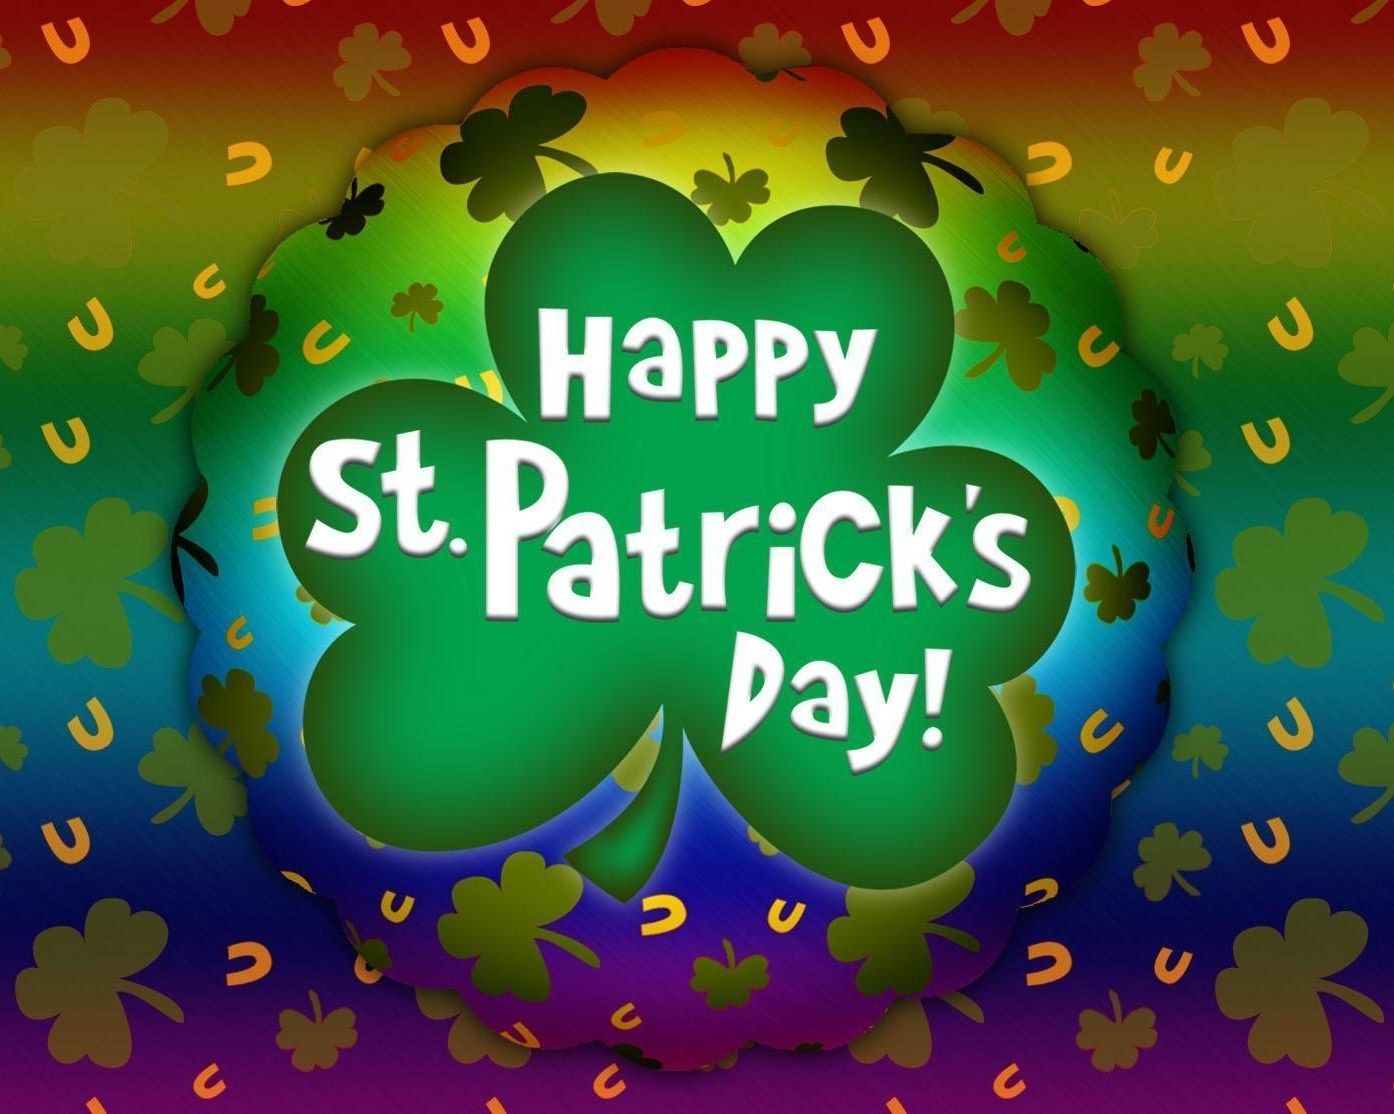 Happy St Patrick's Day 2019 Quotes Wishes Messages Sayings Funny